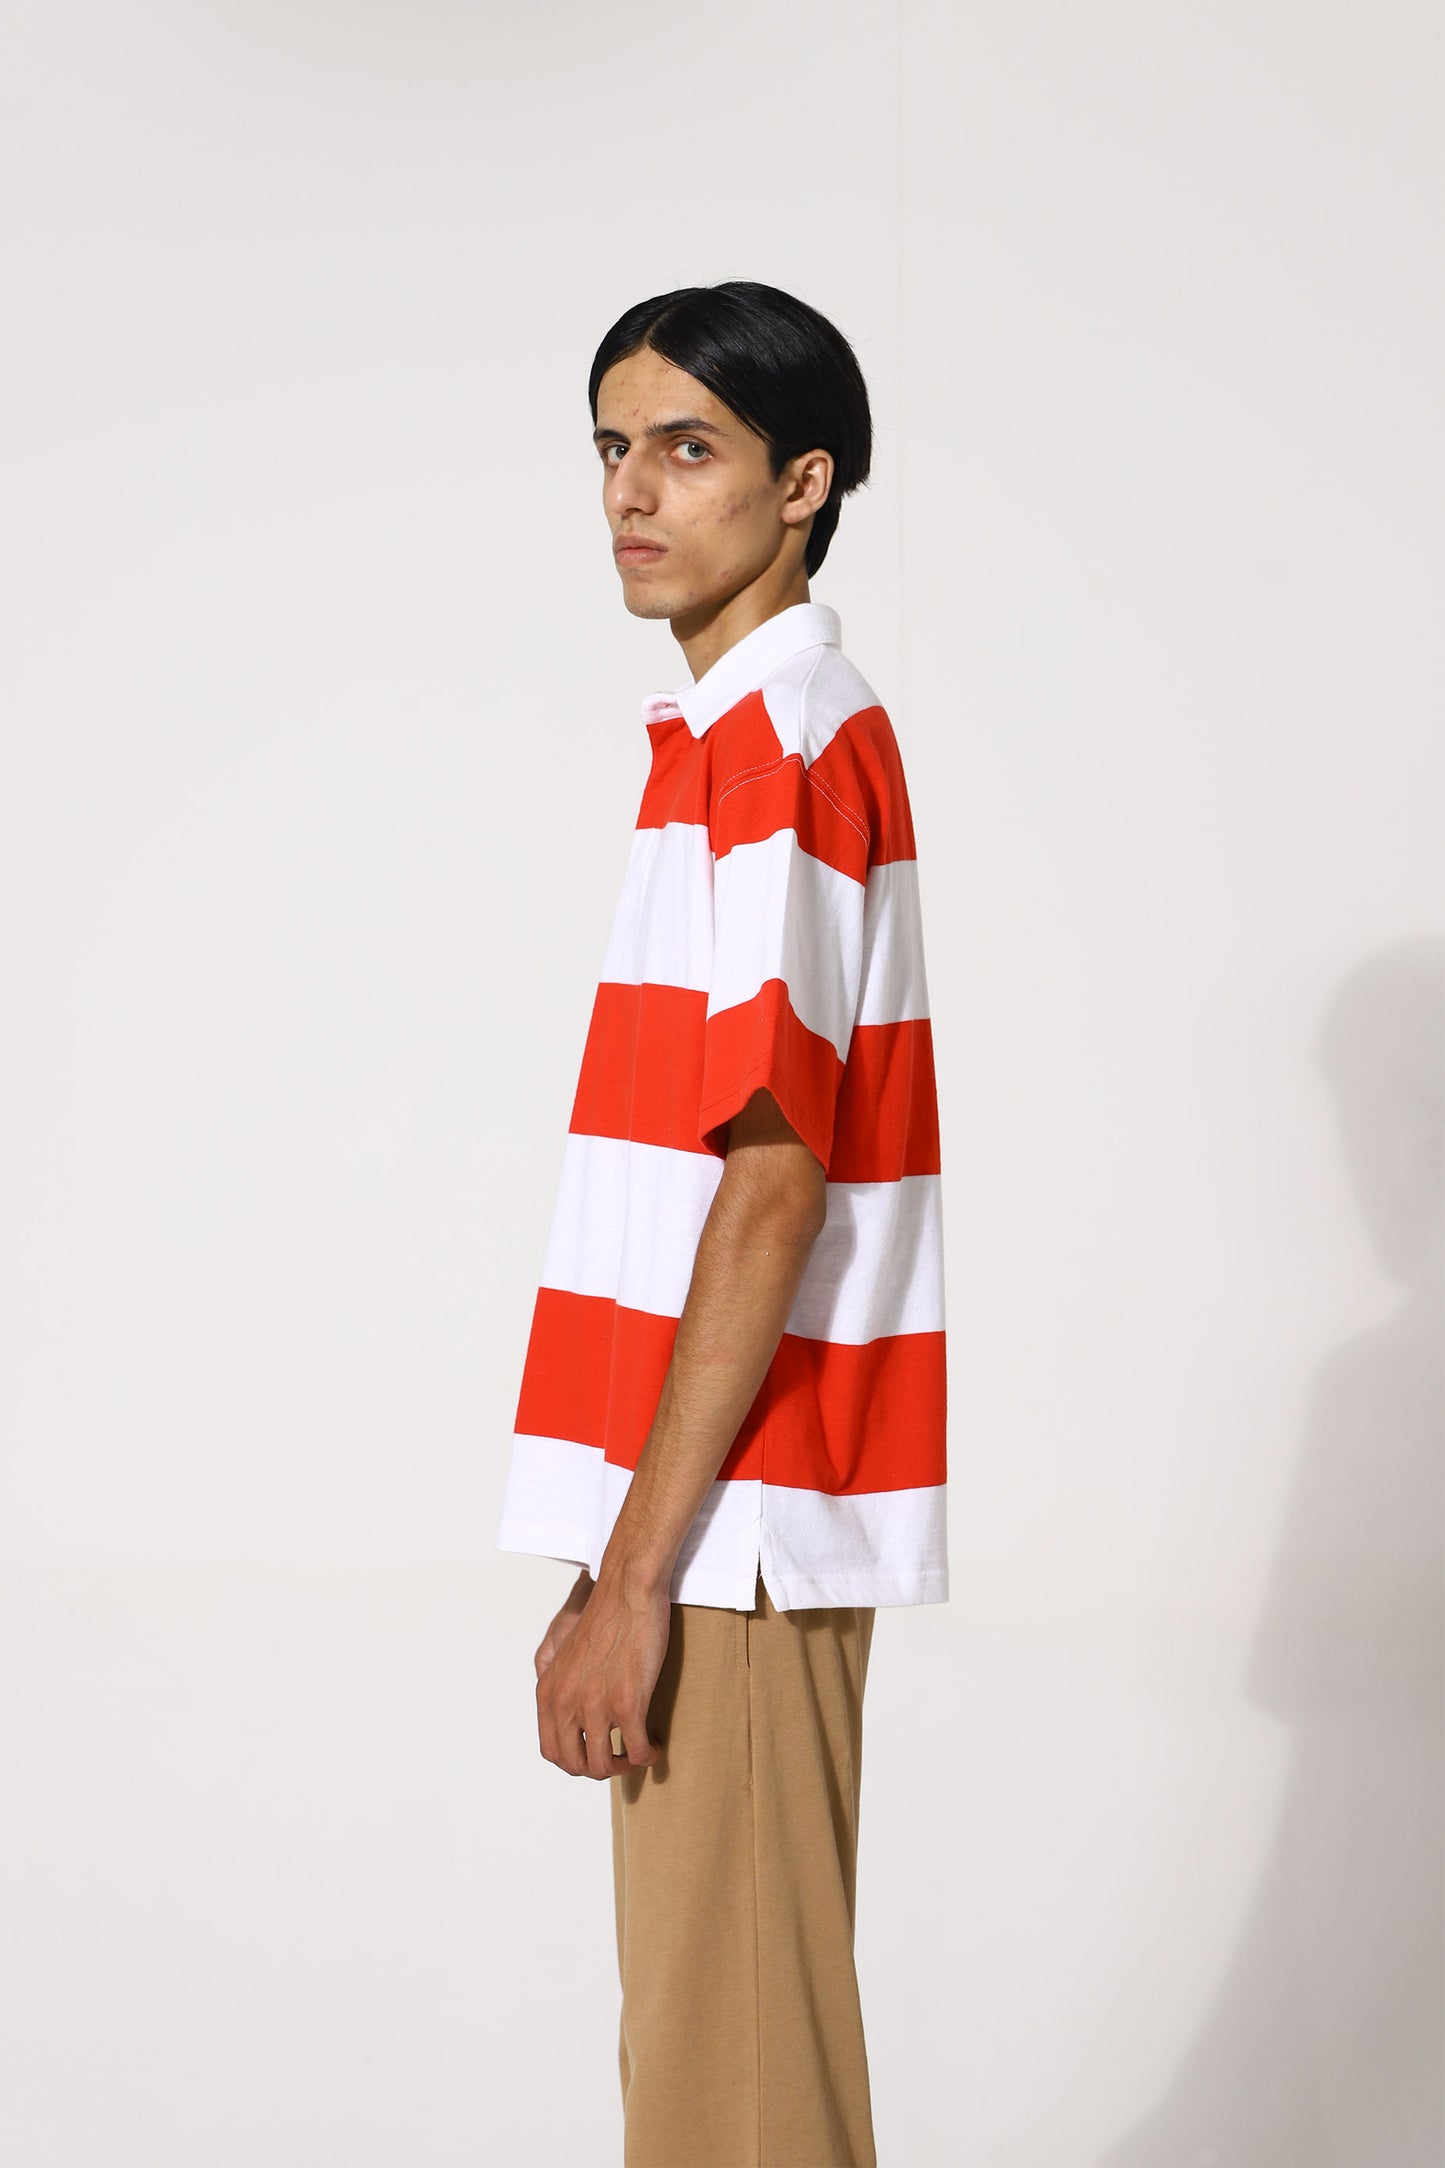 RED & WHITE OVERSIZED POLO